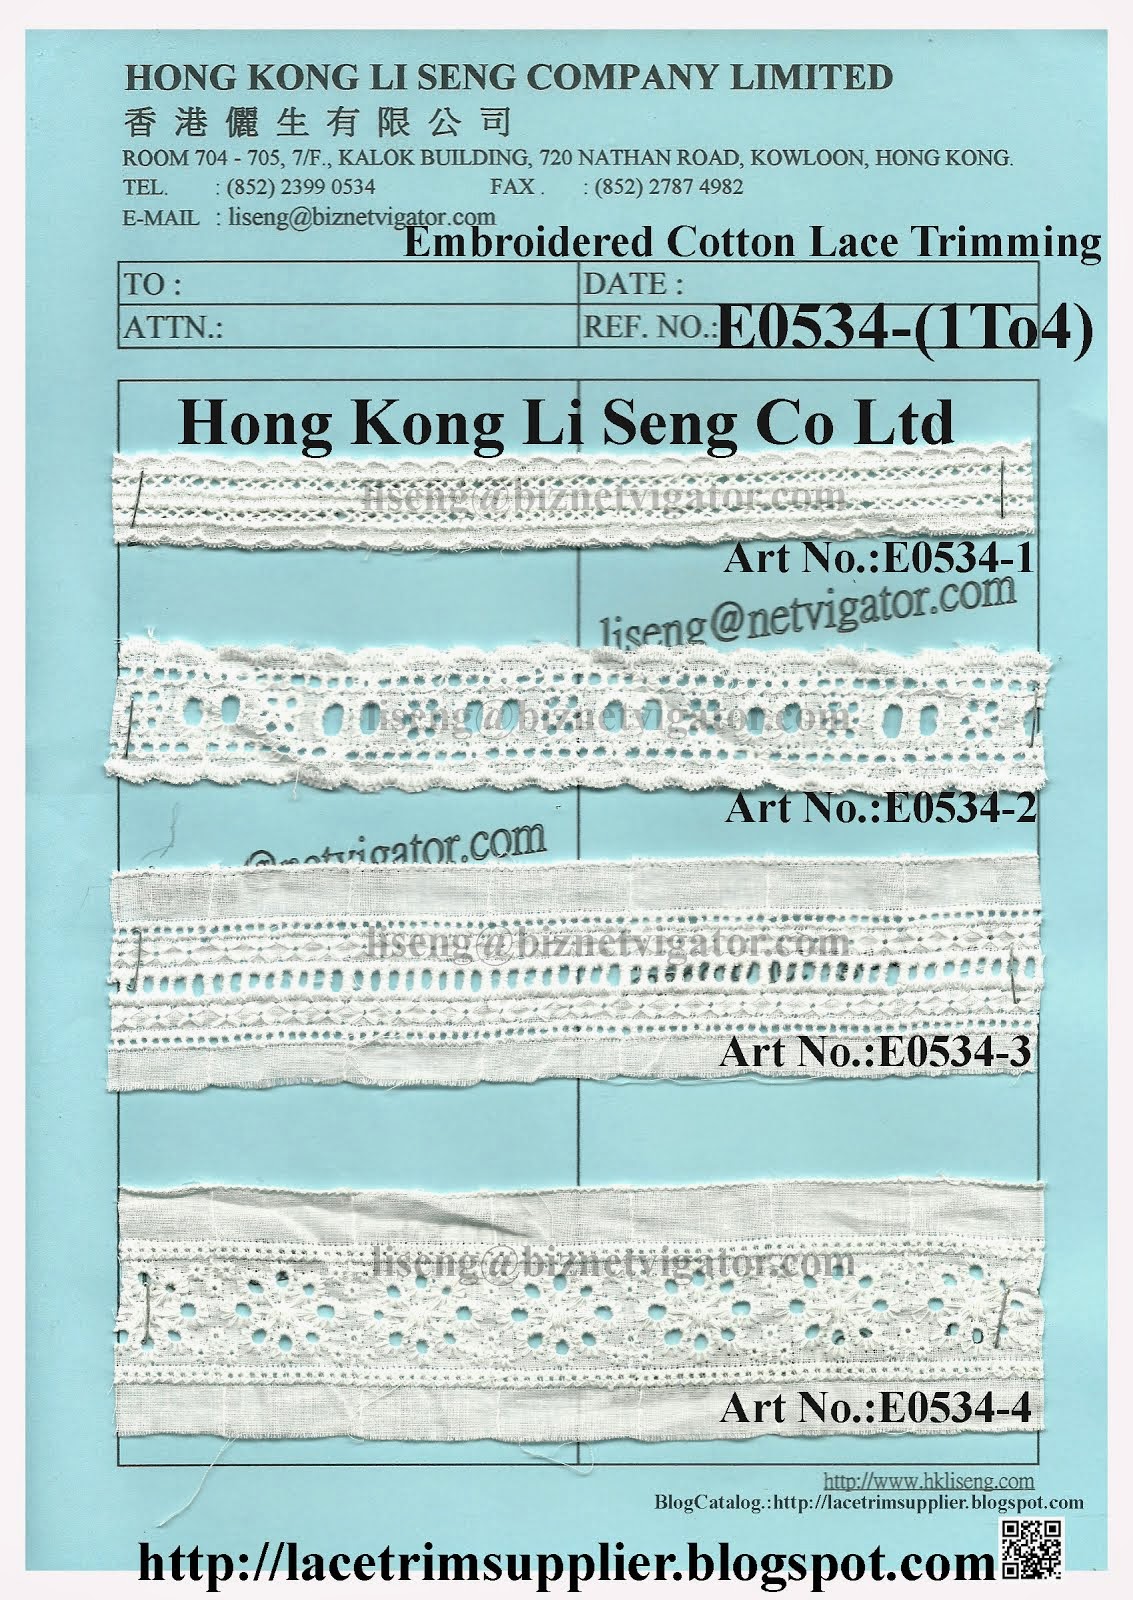 Embroidered Cotton Lace Trimming Factory and Supplier - Hong Kong Li Seng Co Ltd